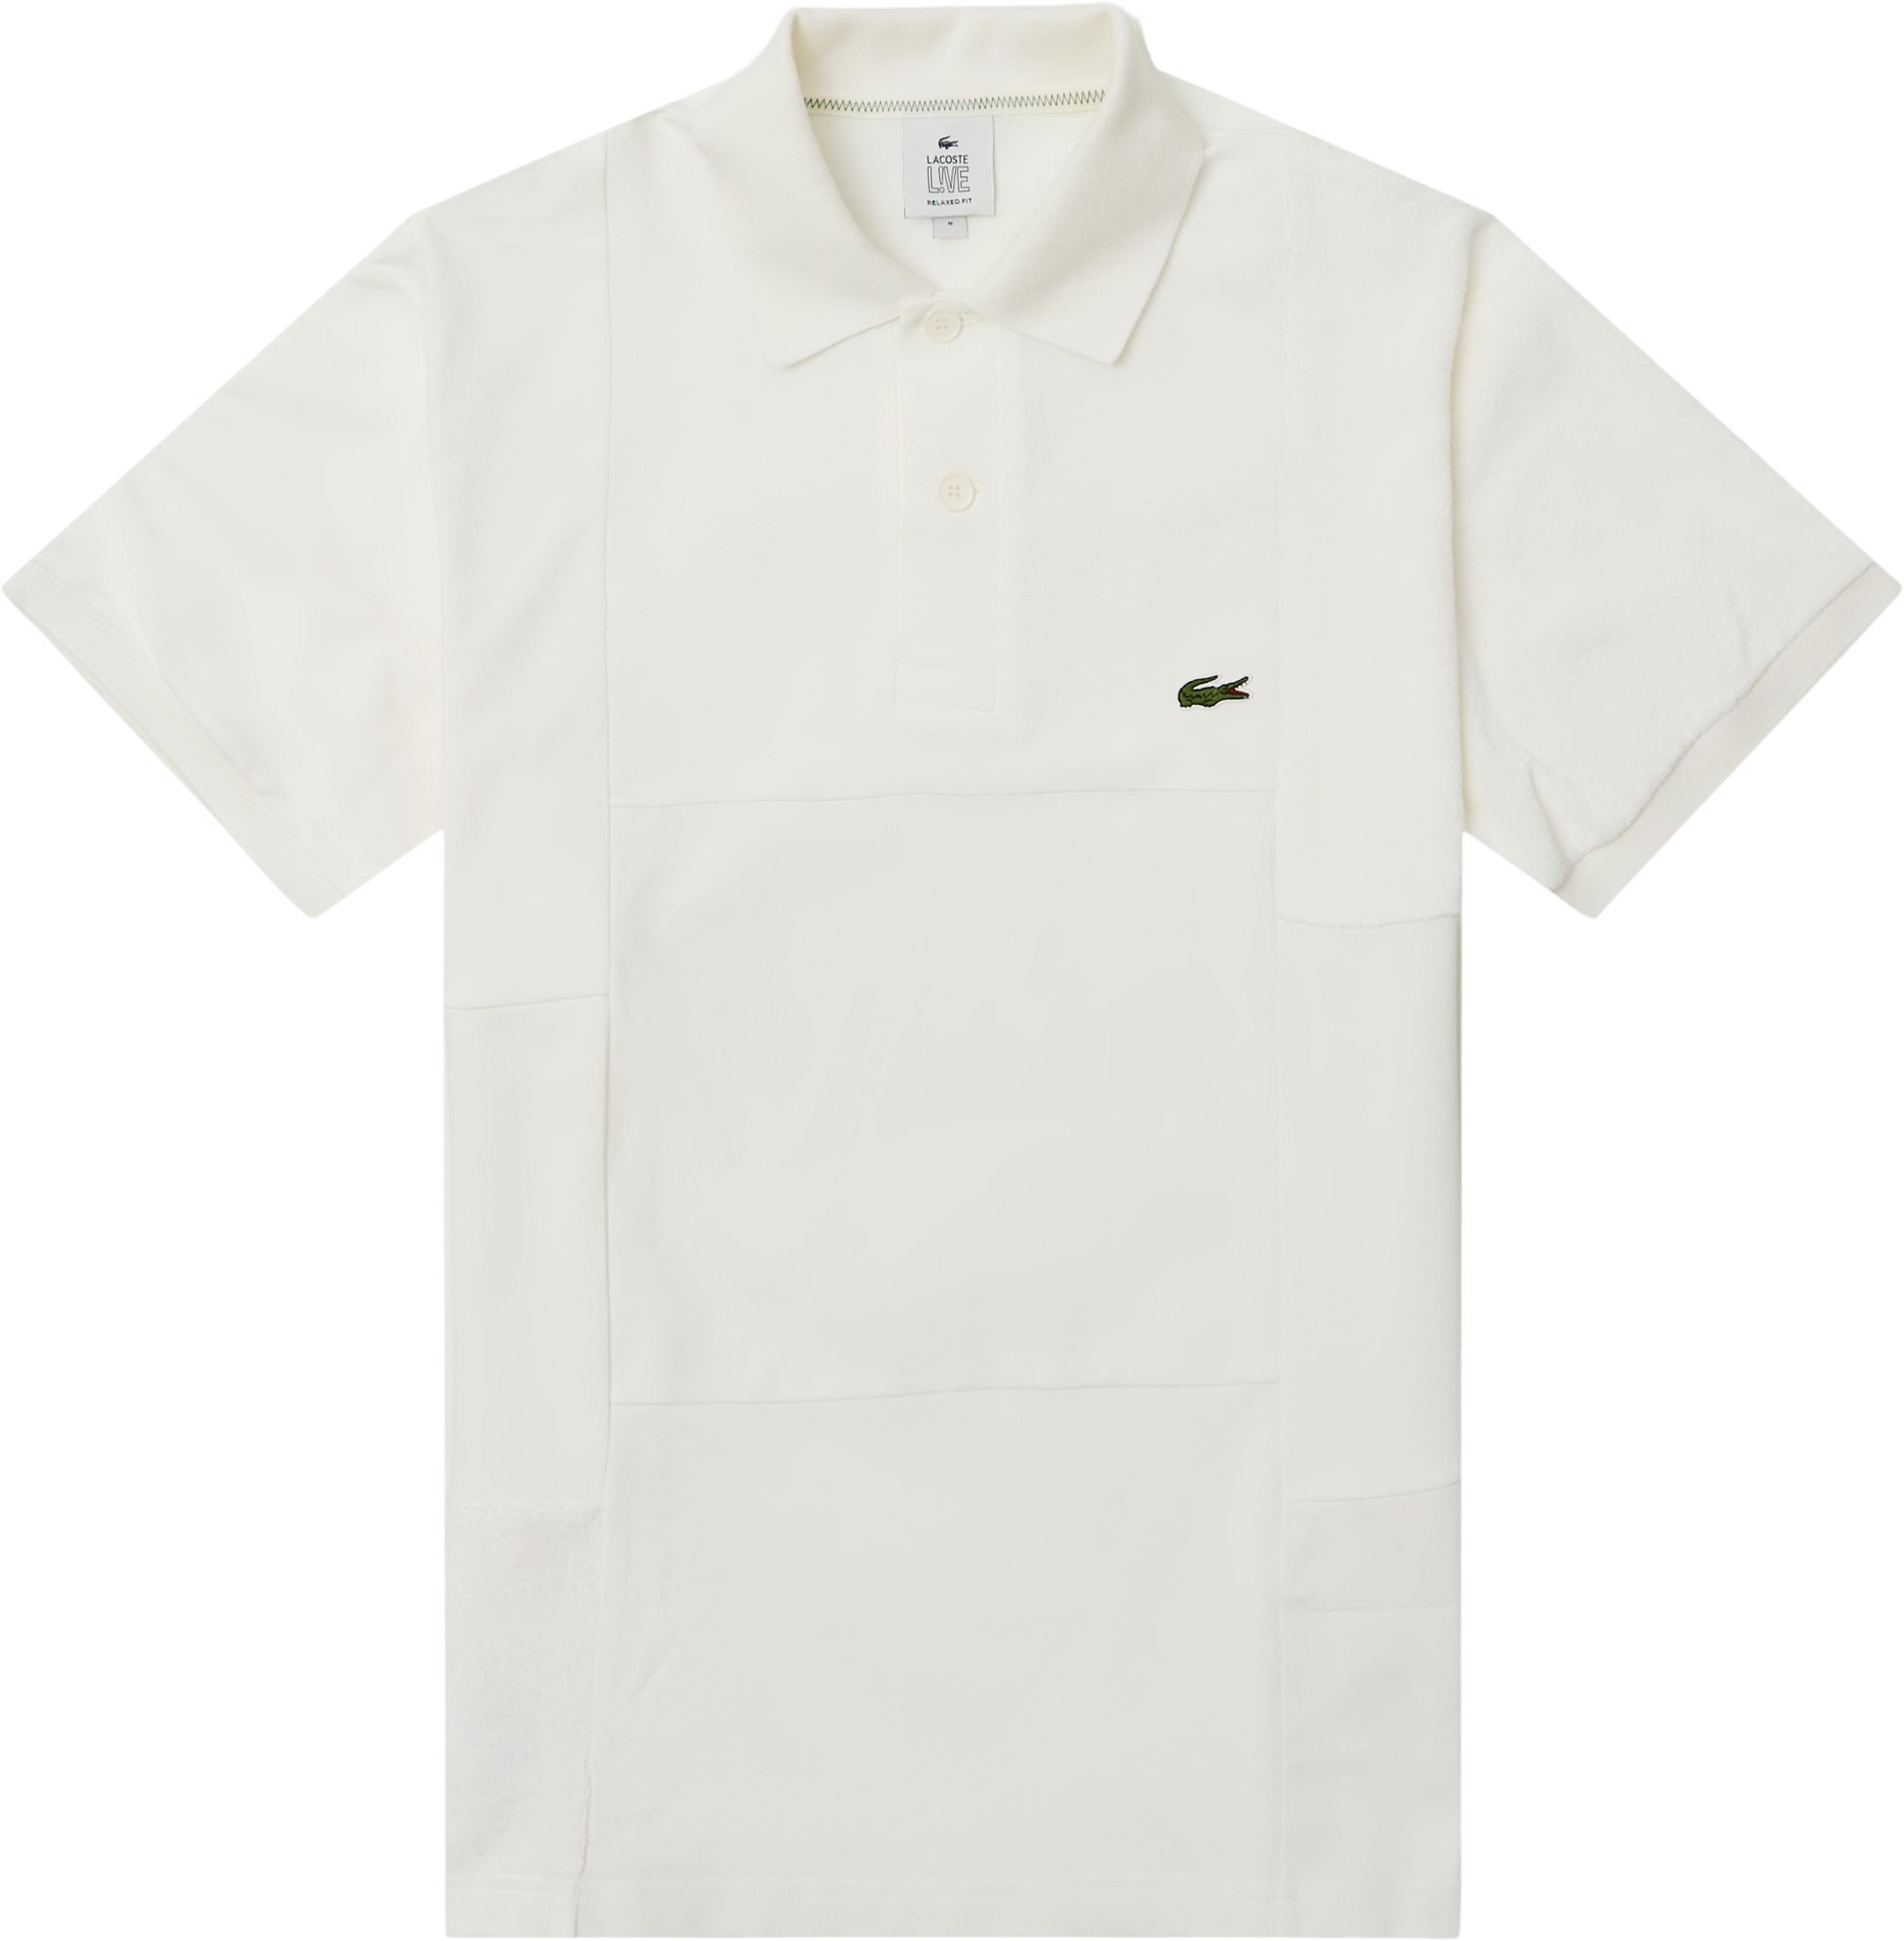 Dh7203 Polo Tee - T-shirts - Regular fit - White